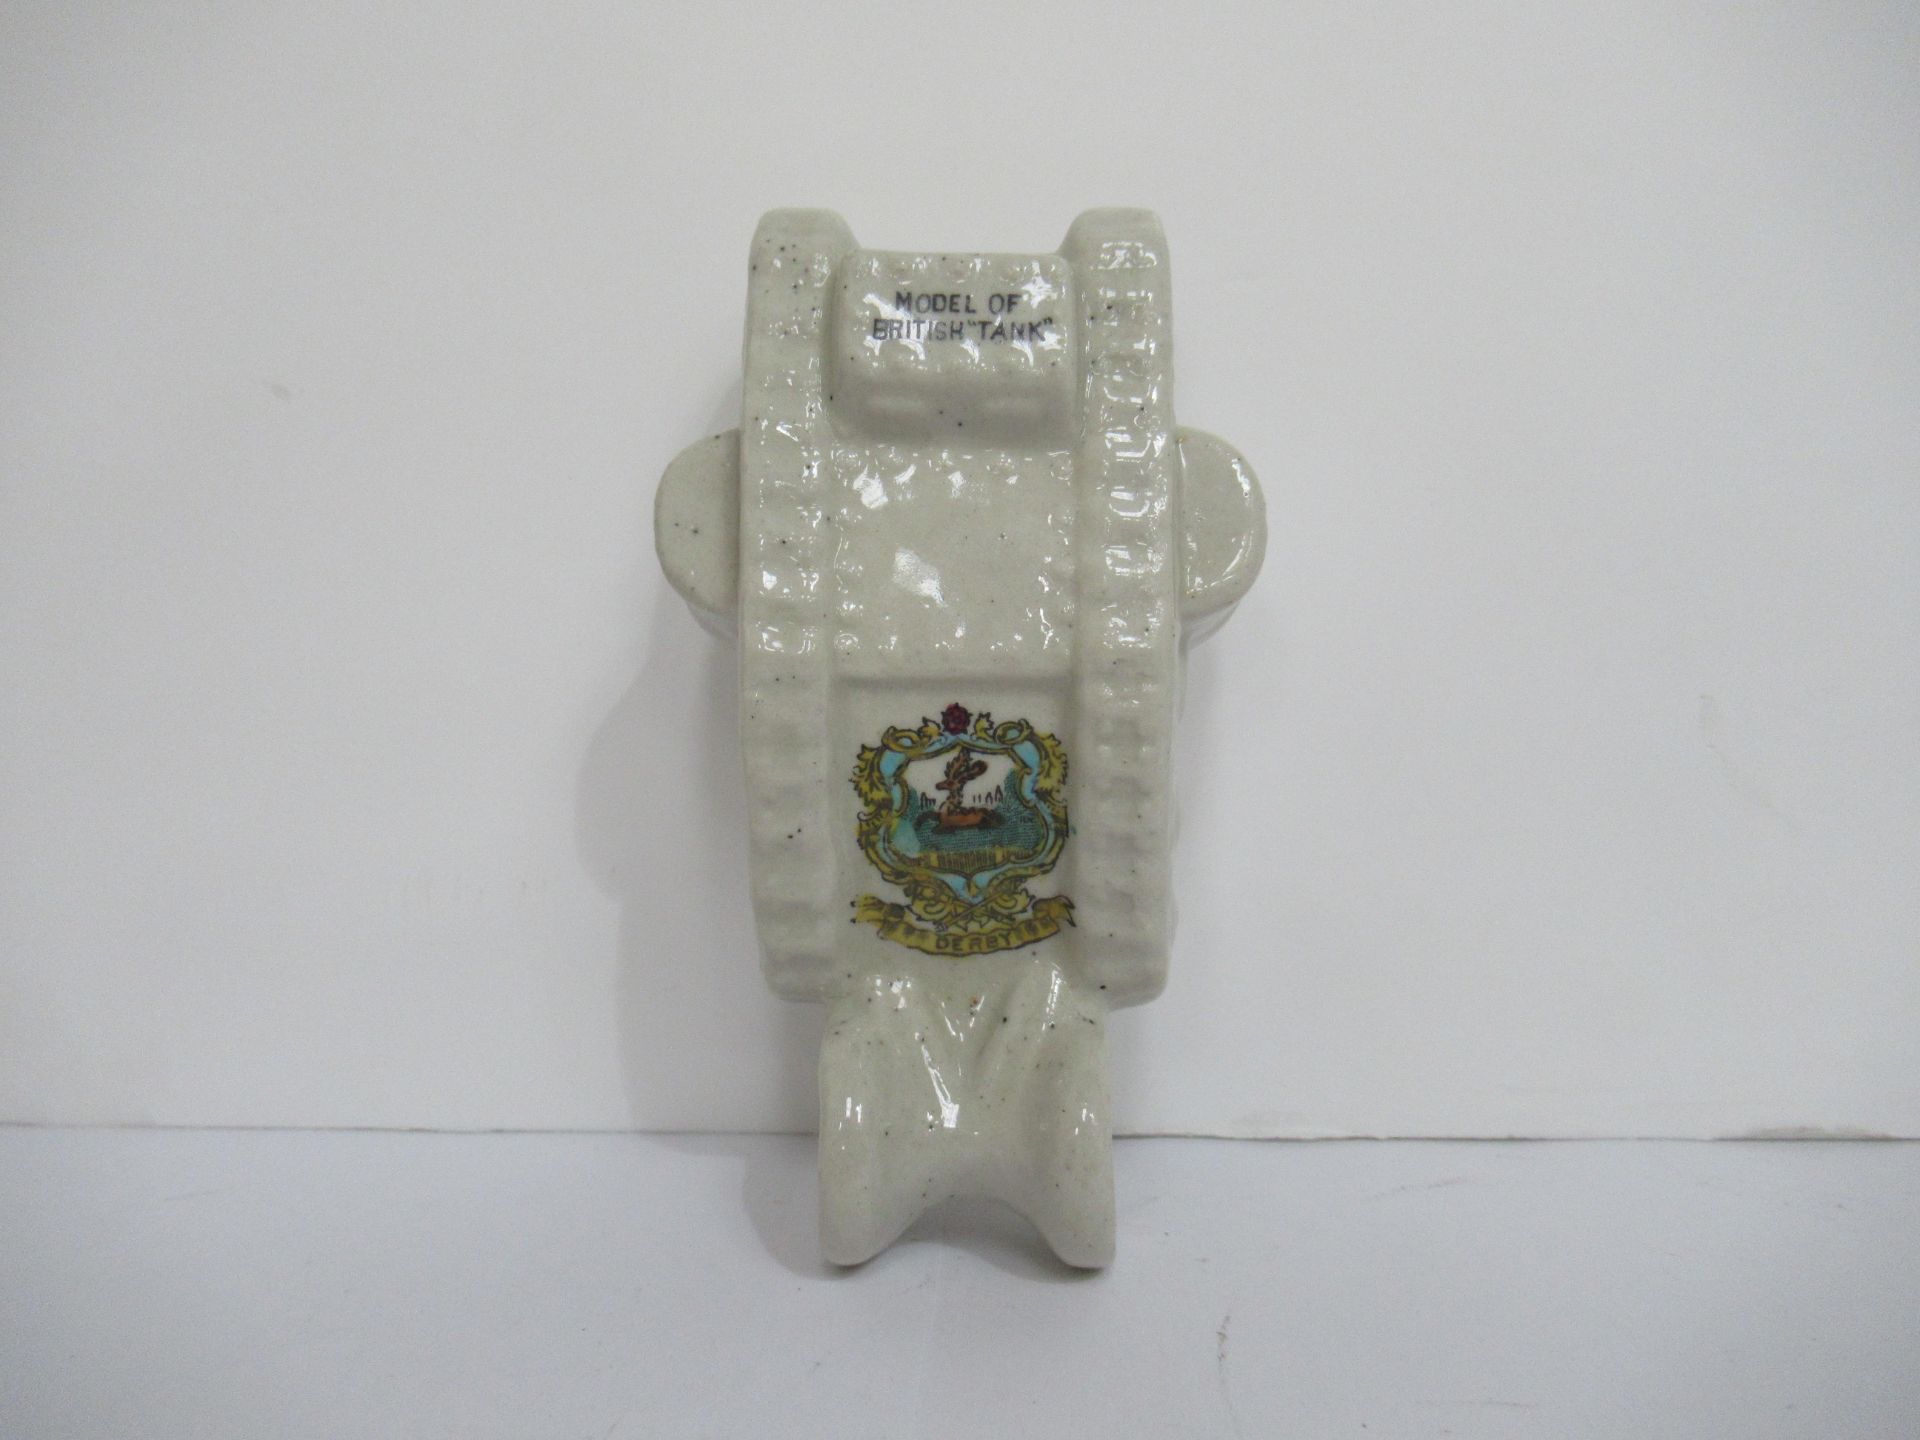 Crested China Willow art 'model of British Tank' with Derby coat of arms (130mm x 75mm) - Image 5 of 10